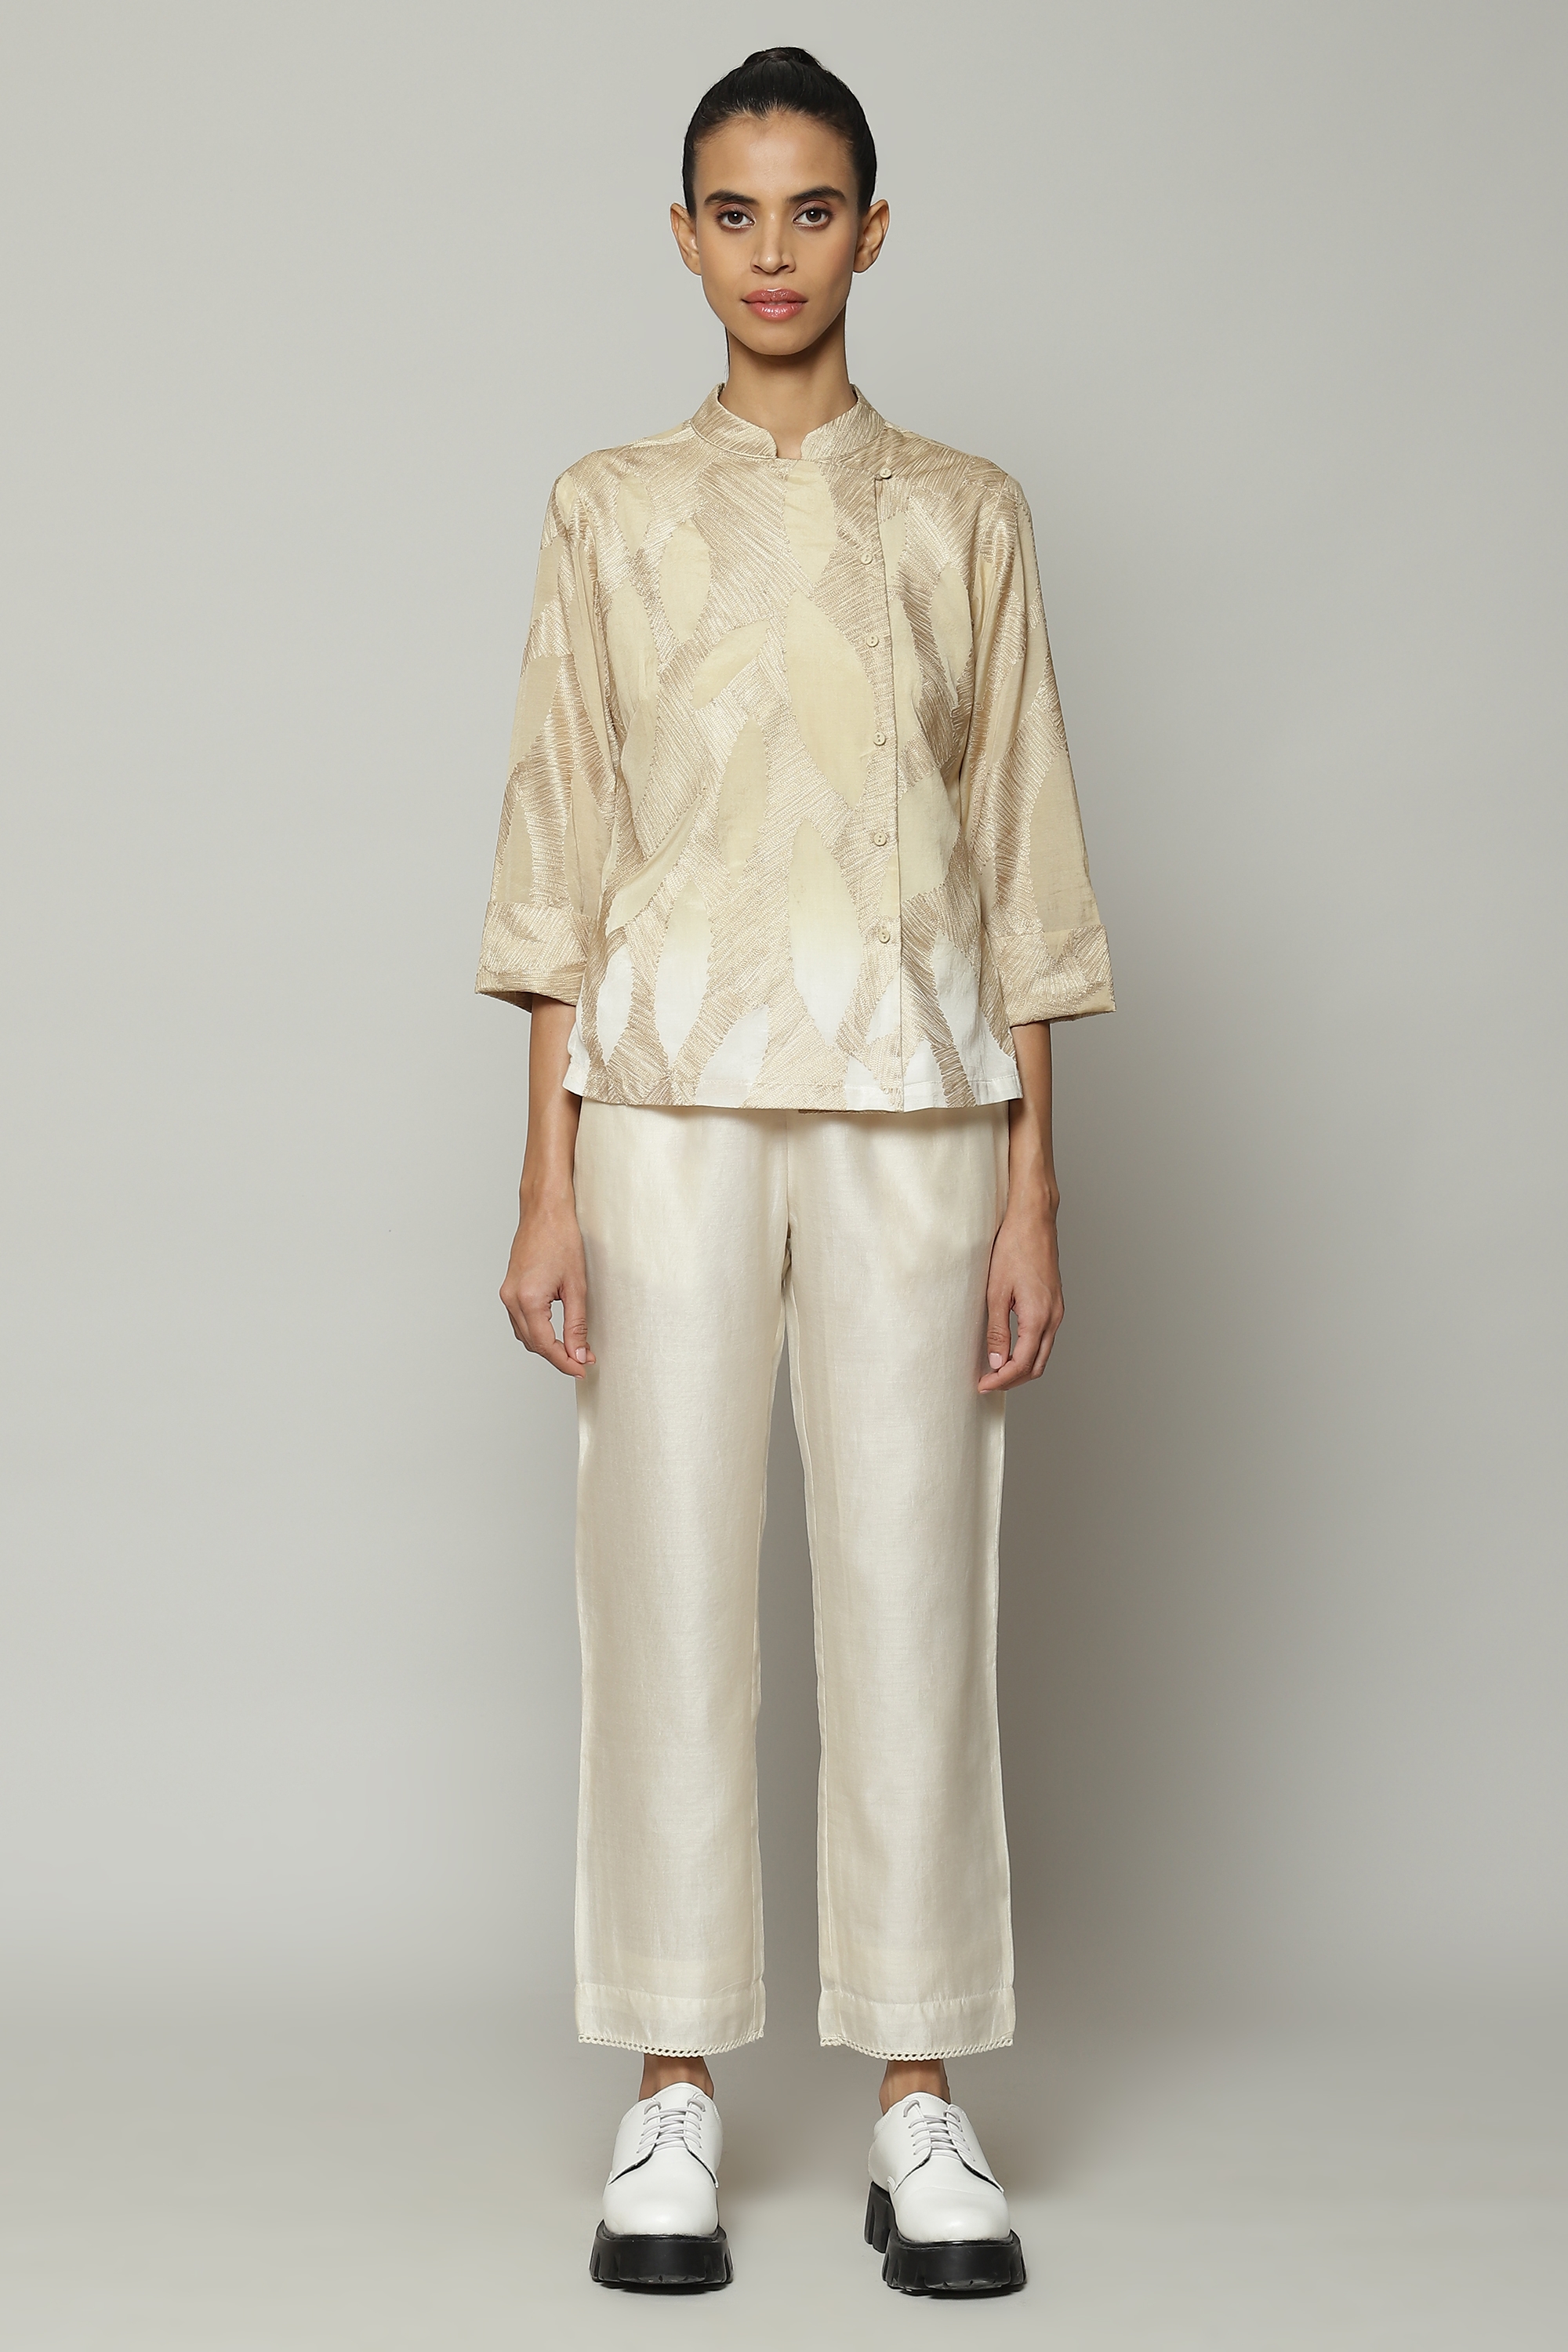 ABRAHAM AND THAKORE | Ombre Crewel Embroidered Voile Shirt Parchment